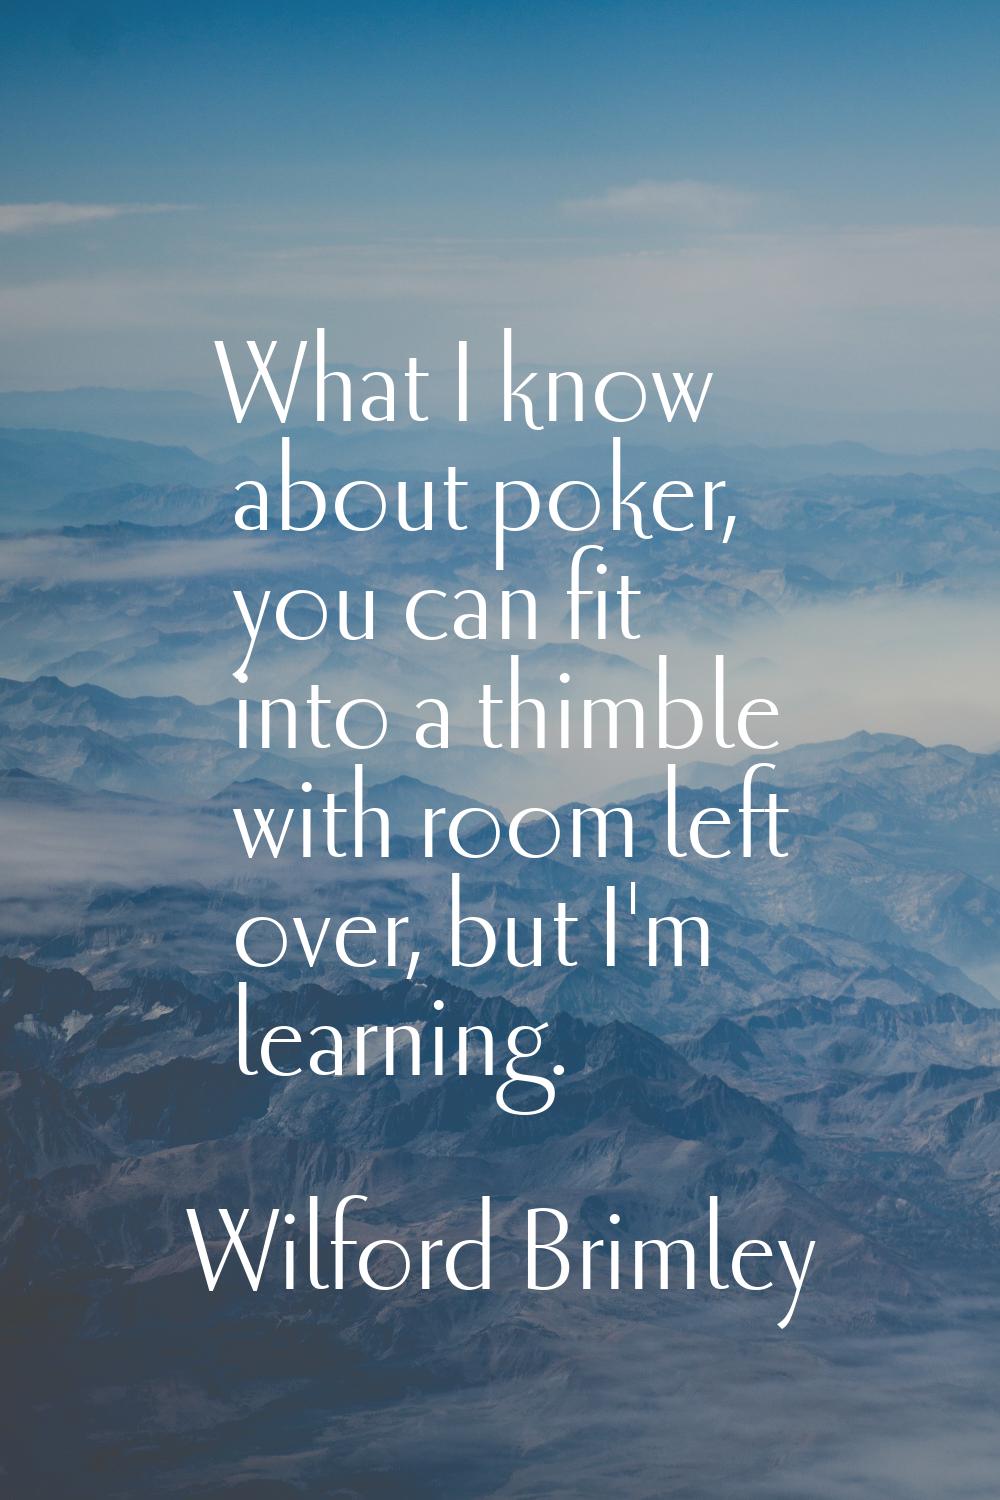 What I know about poker, you can fit into a thimble with room left over, but I'm learning.